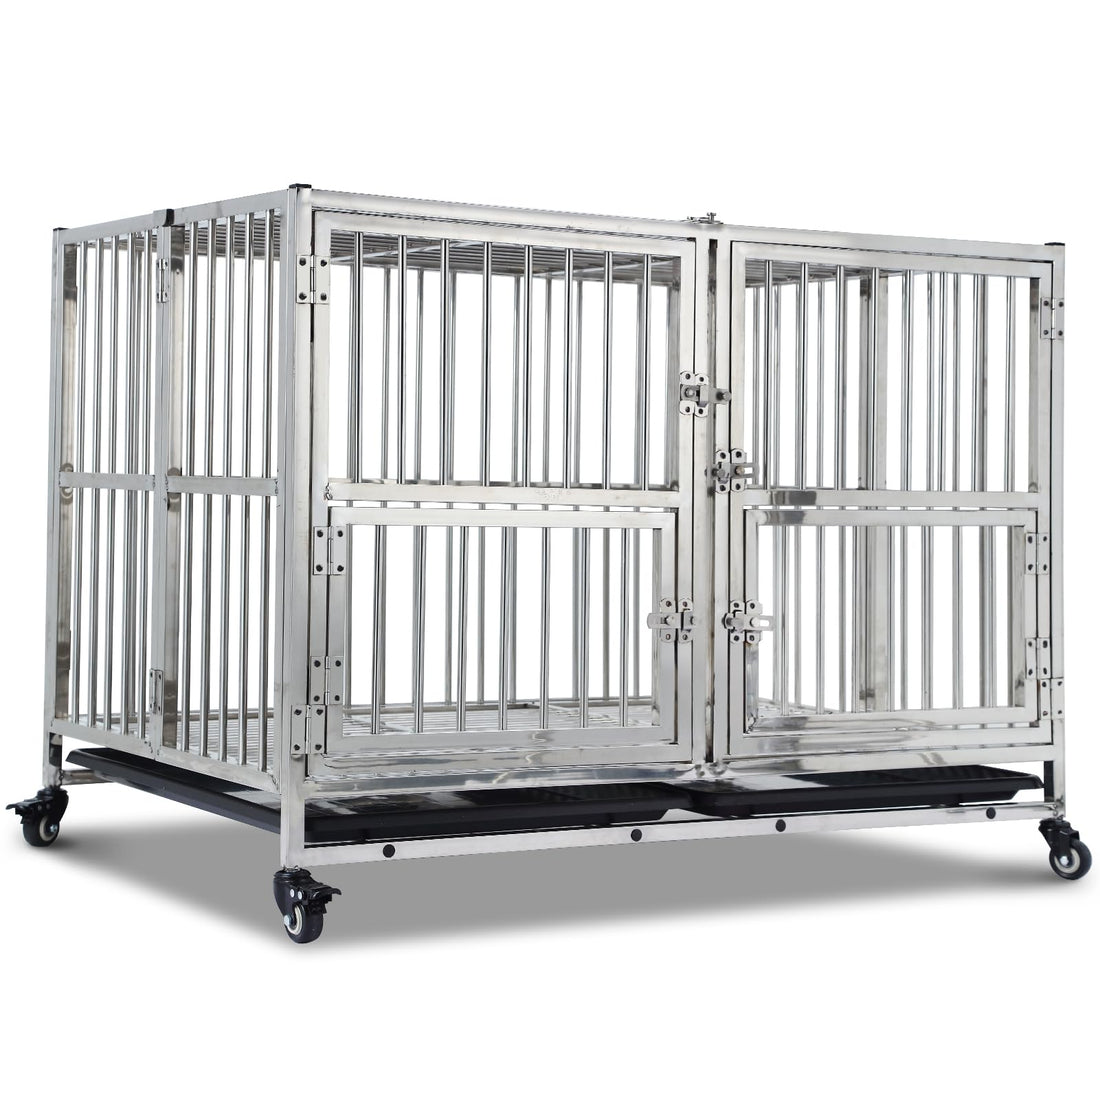 42 Inch Full Stainless Steel Dog Crate with Wheels & Double Door